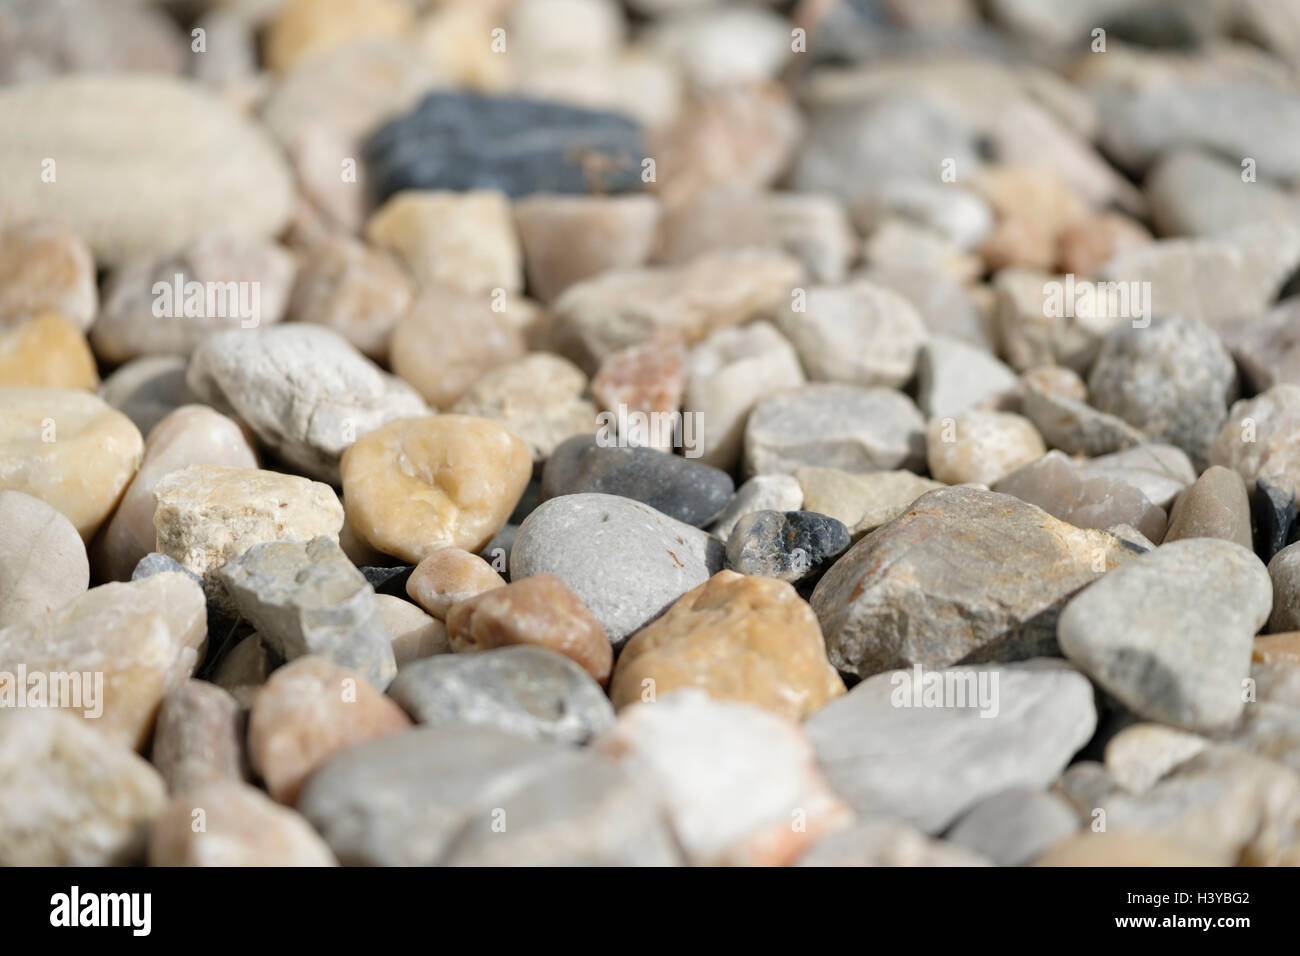 Selective focus close up photo of pebbles Stock Photo